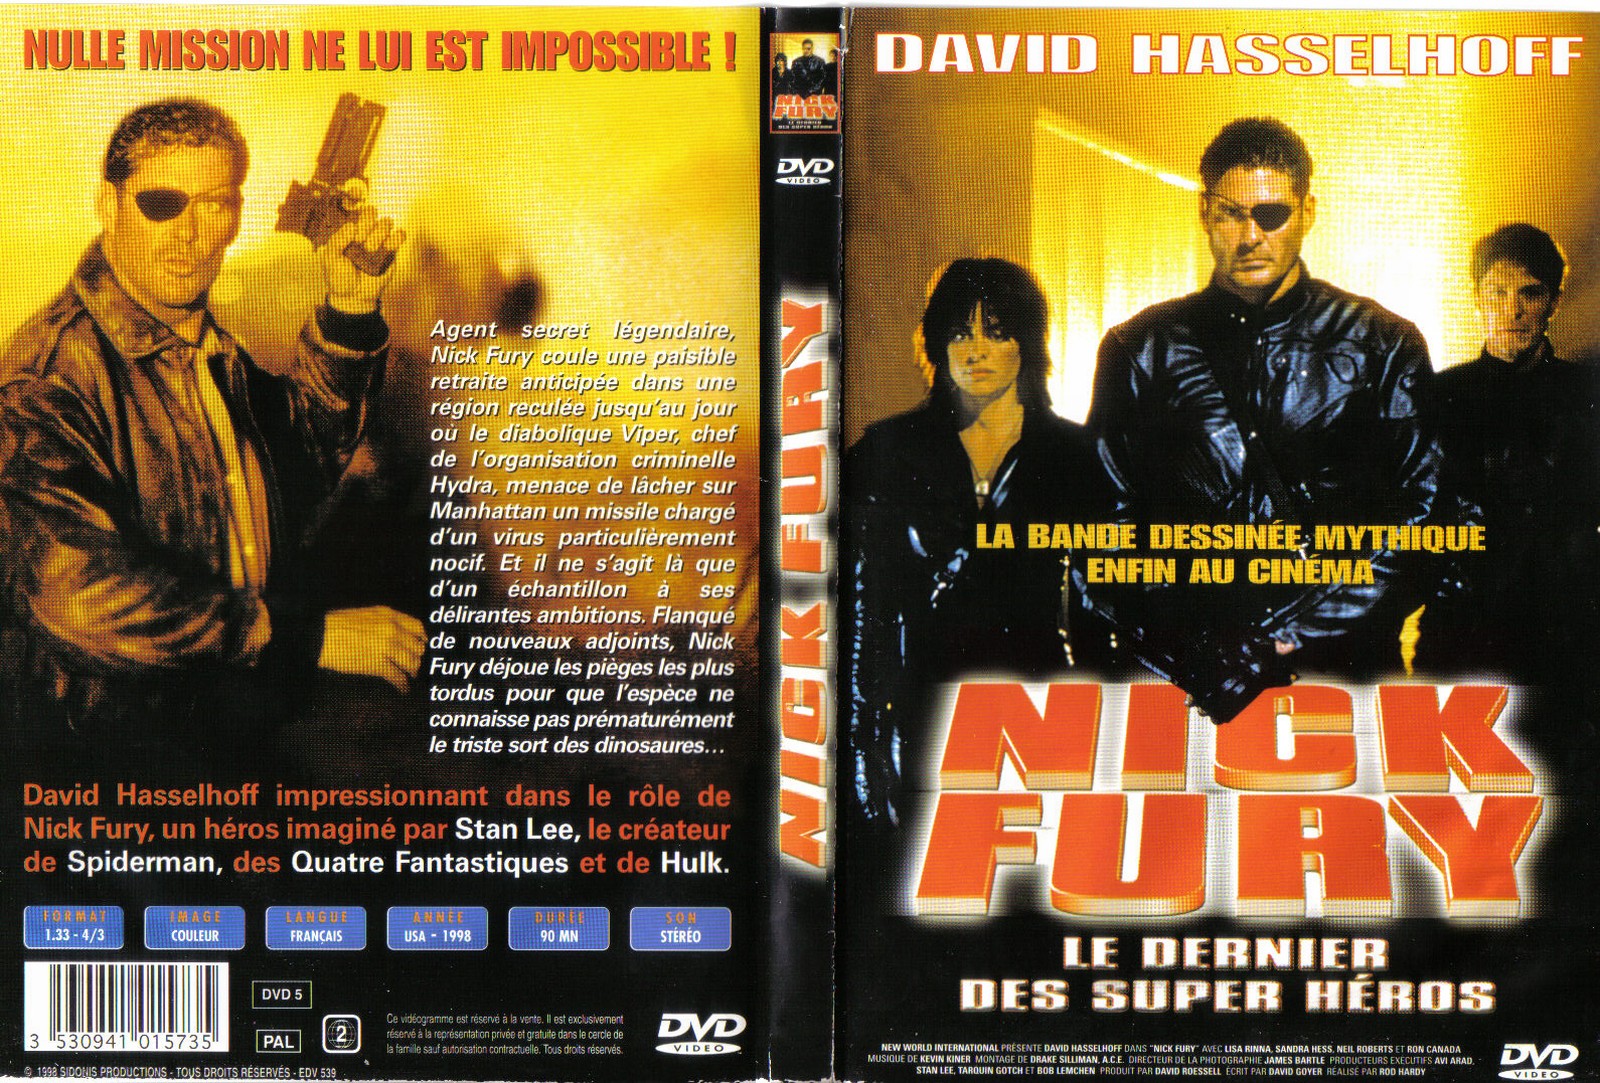 Jaquette DVD Nick fury